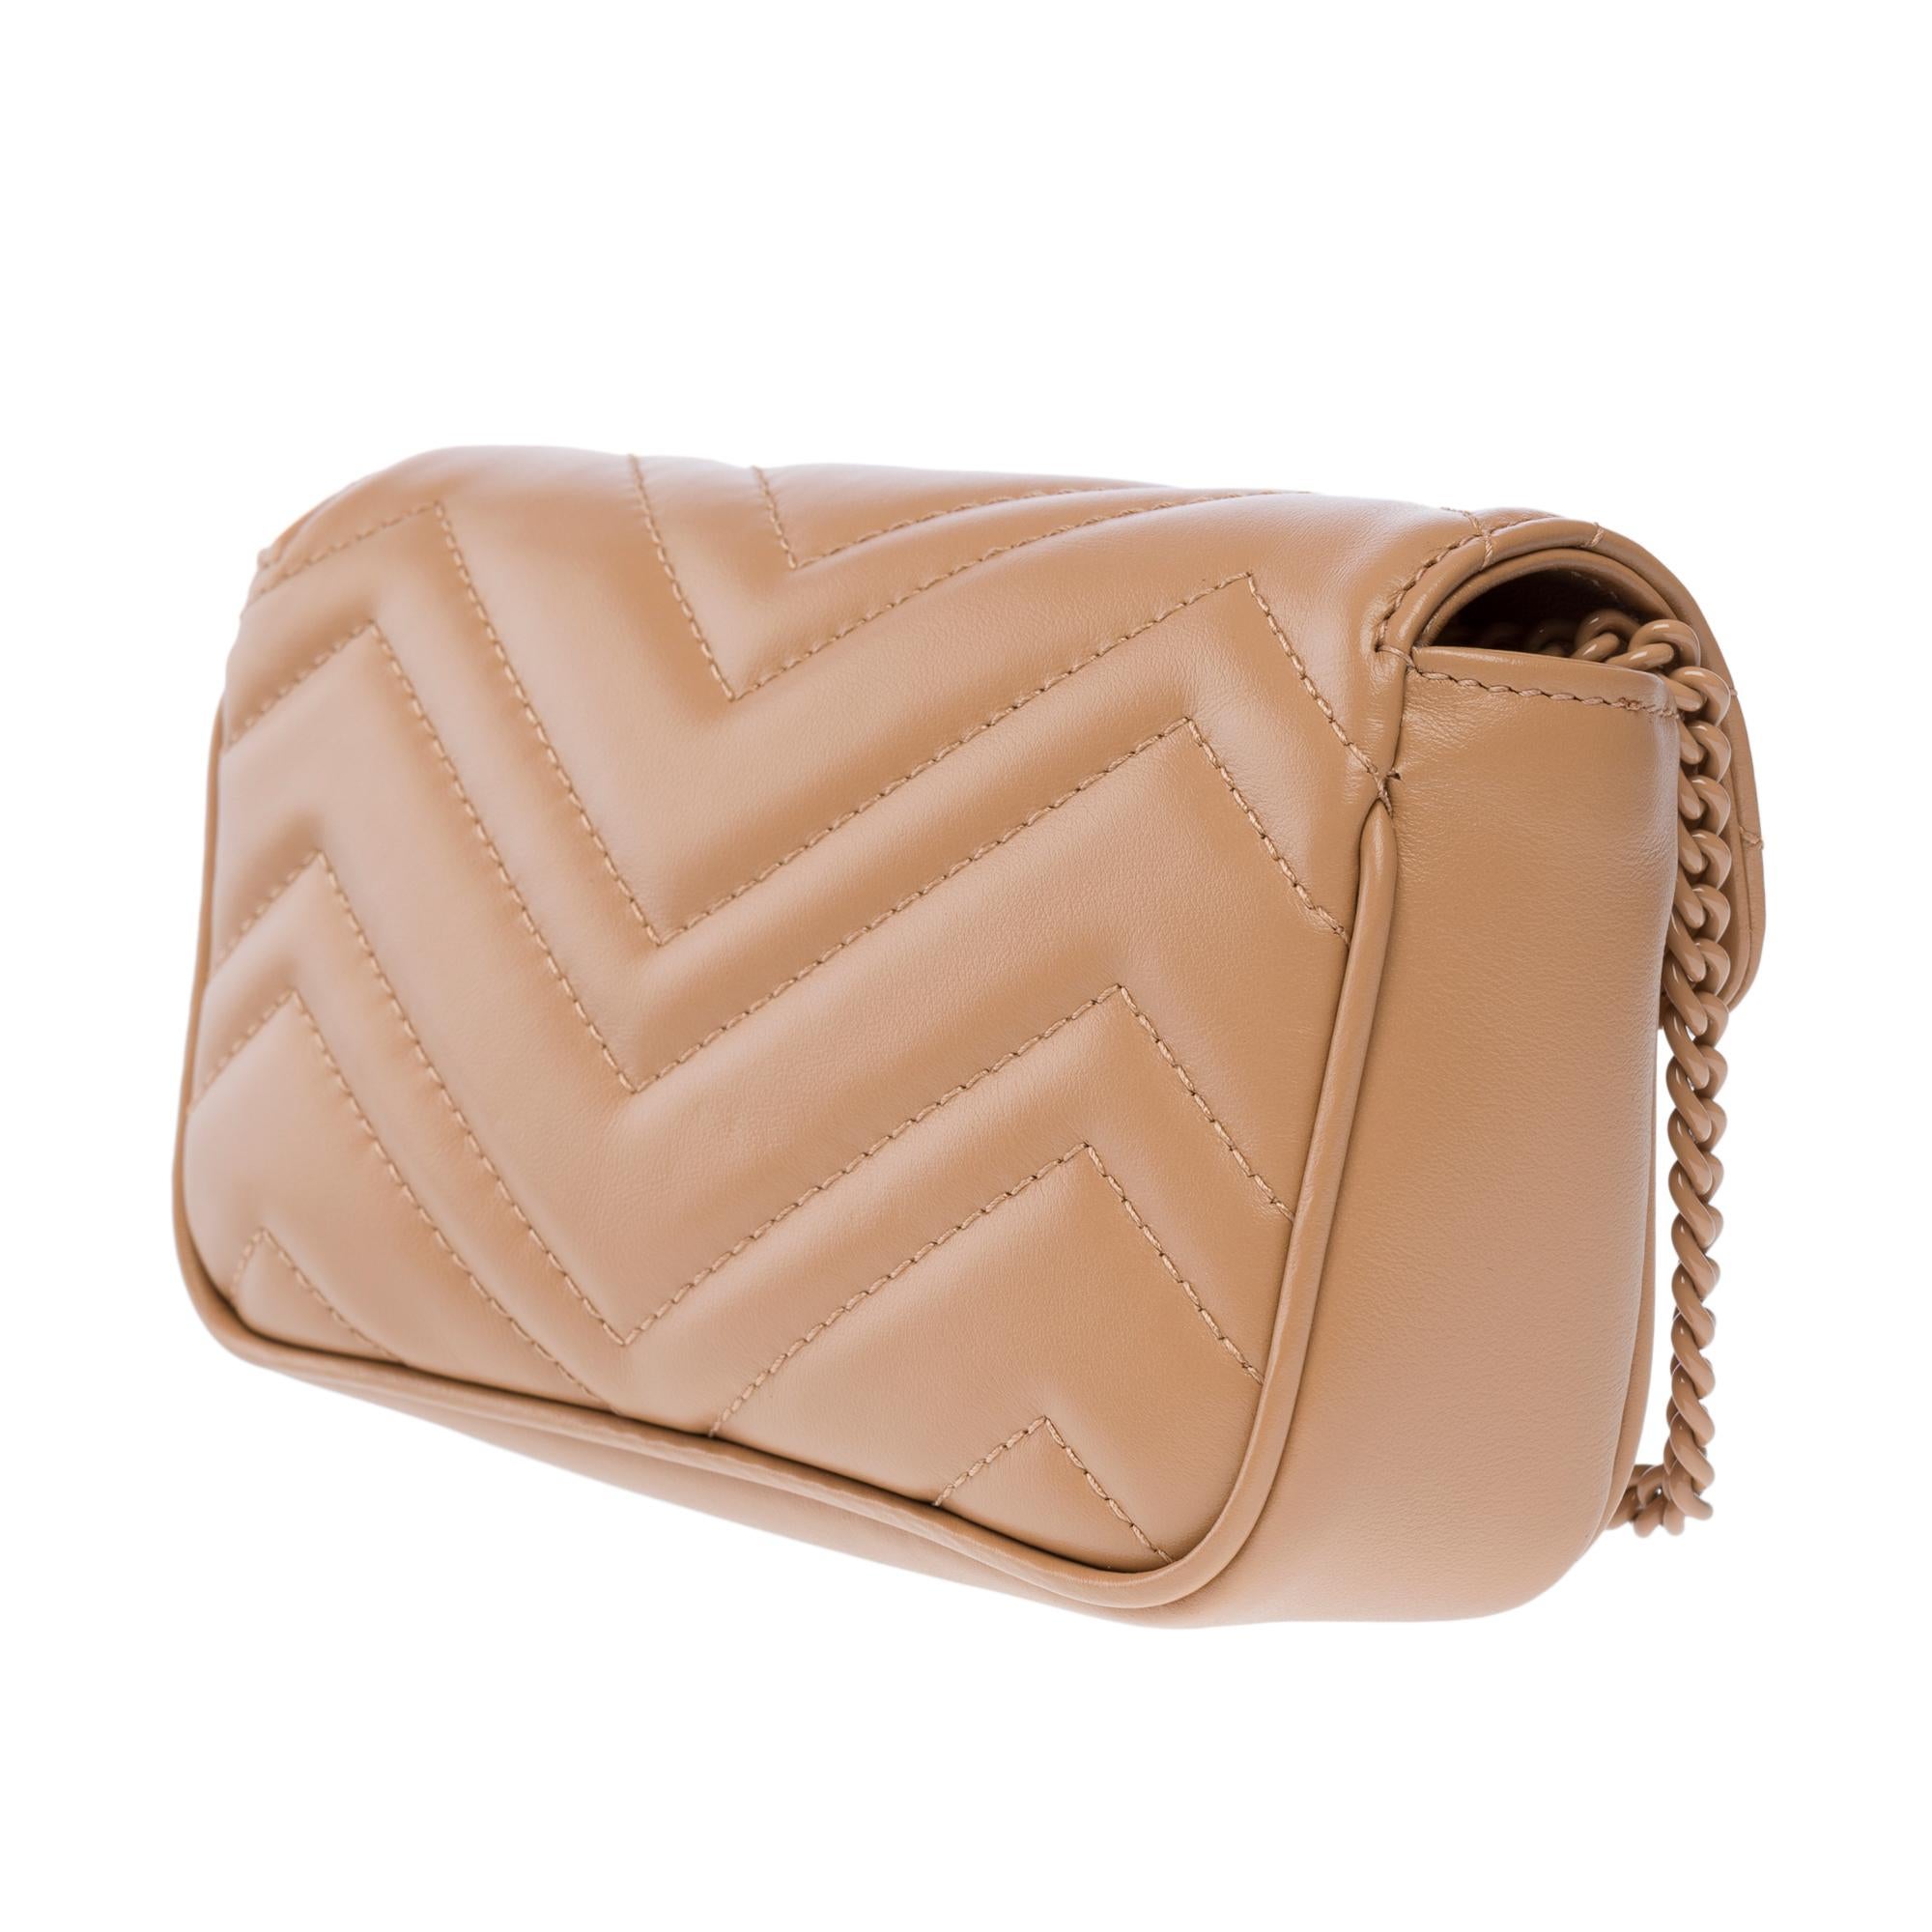 Gucci GG Marmont Mini shoulder bag in beige quilted leather , BHW For Sale 2